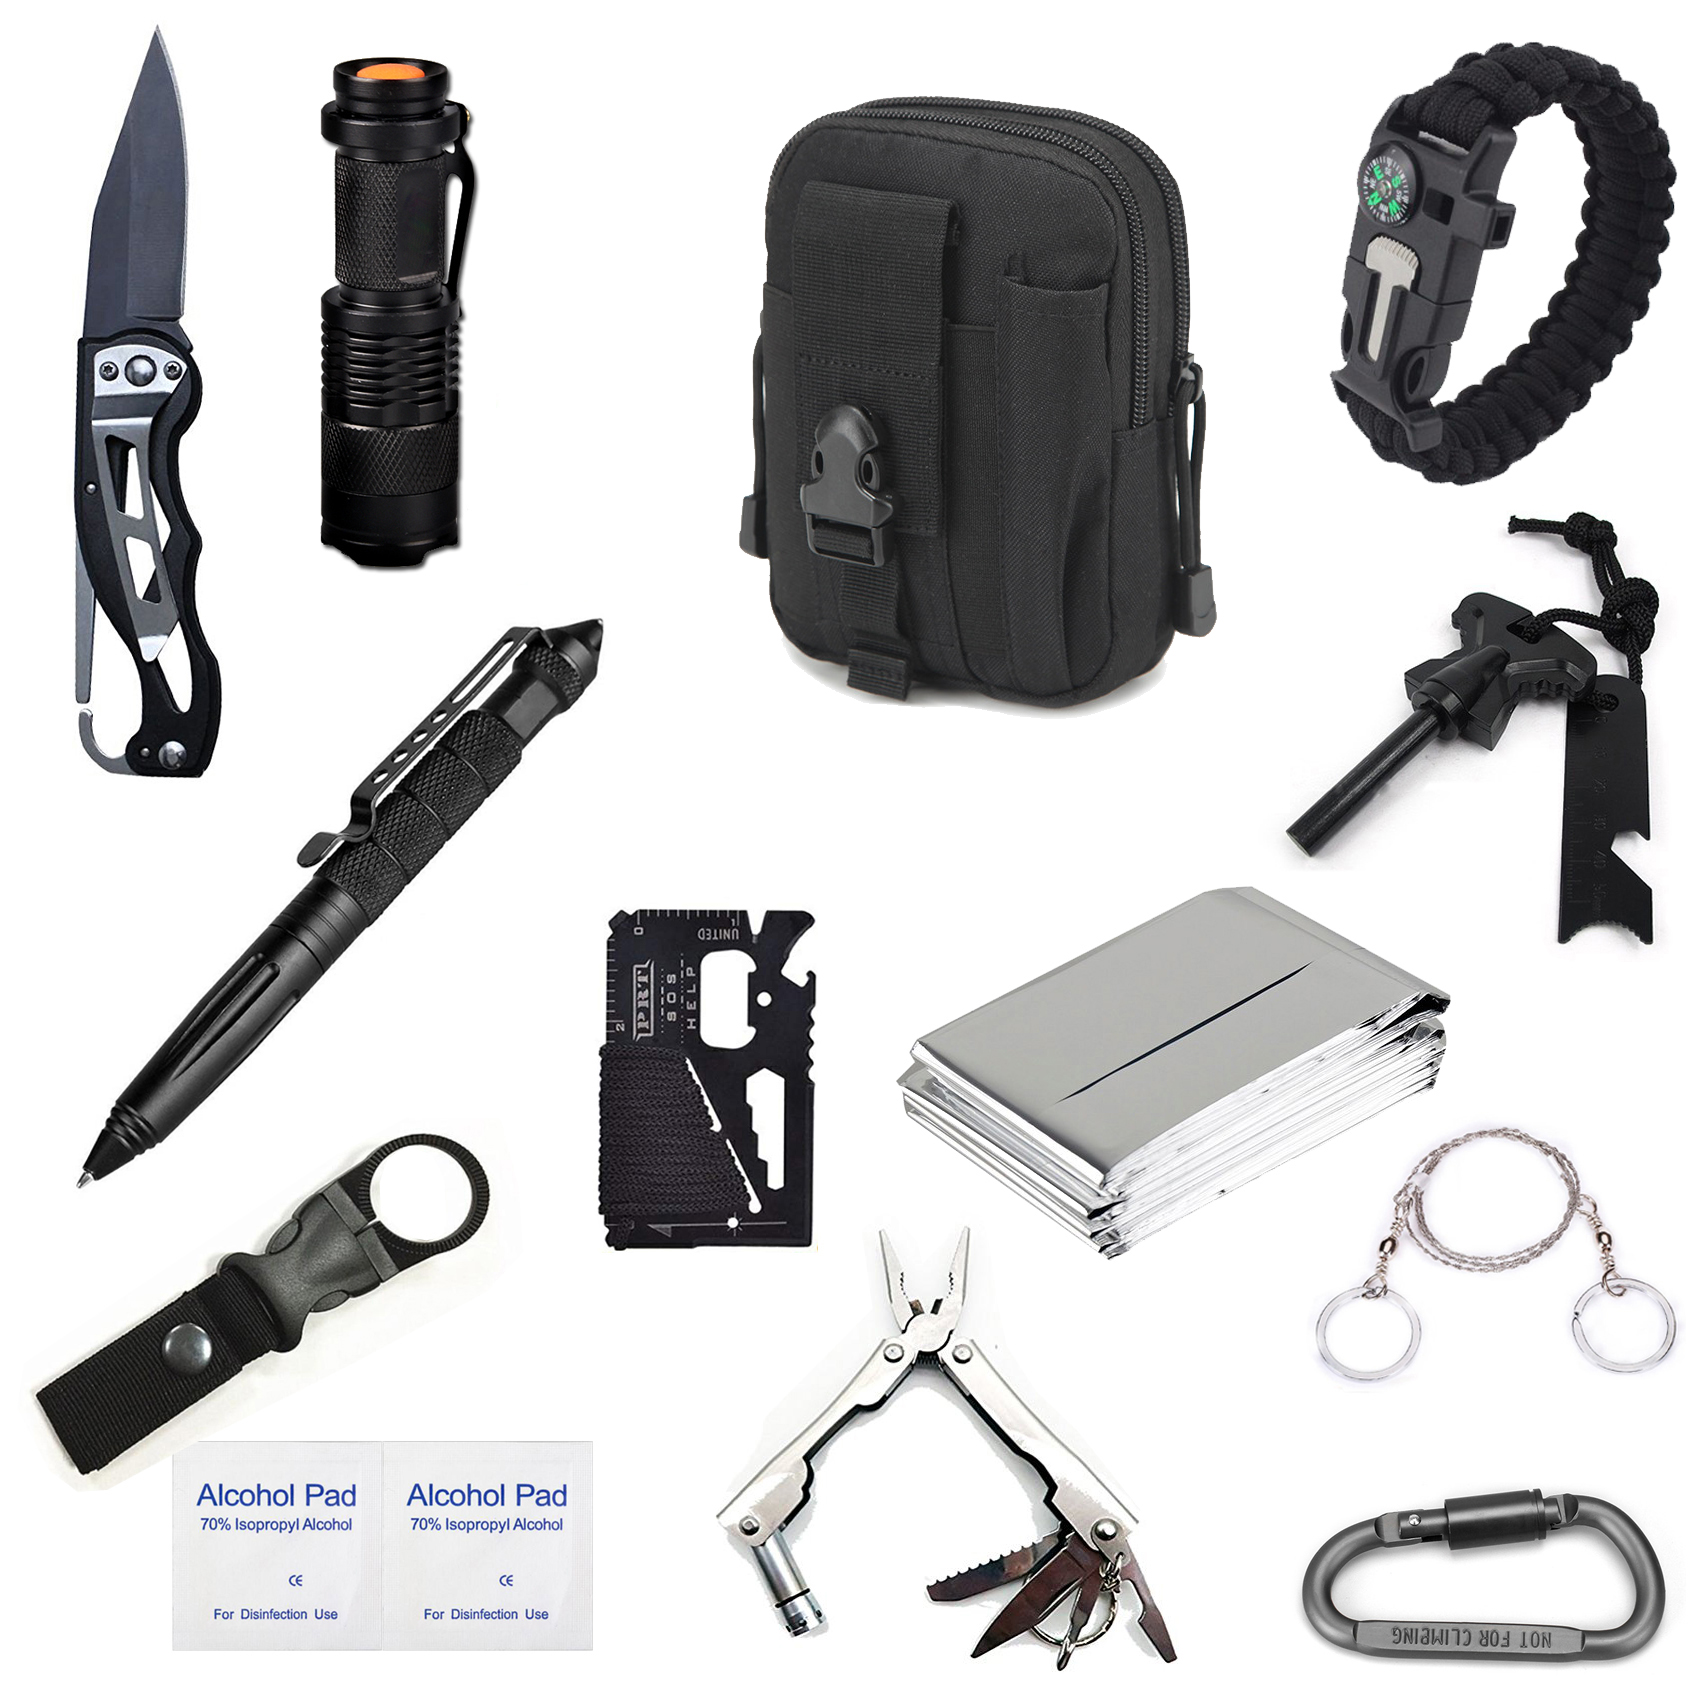 Survival tool kit 14 in 1, Survival Gear and Equipment, Camping